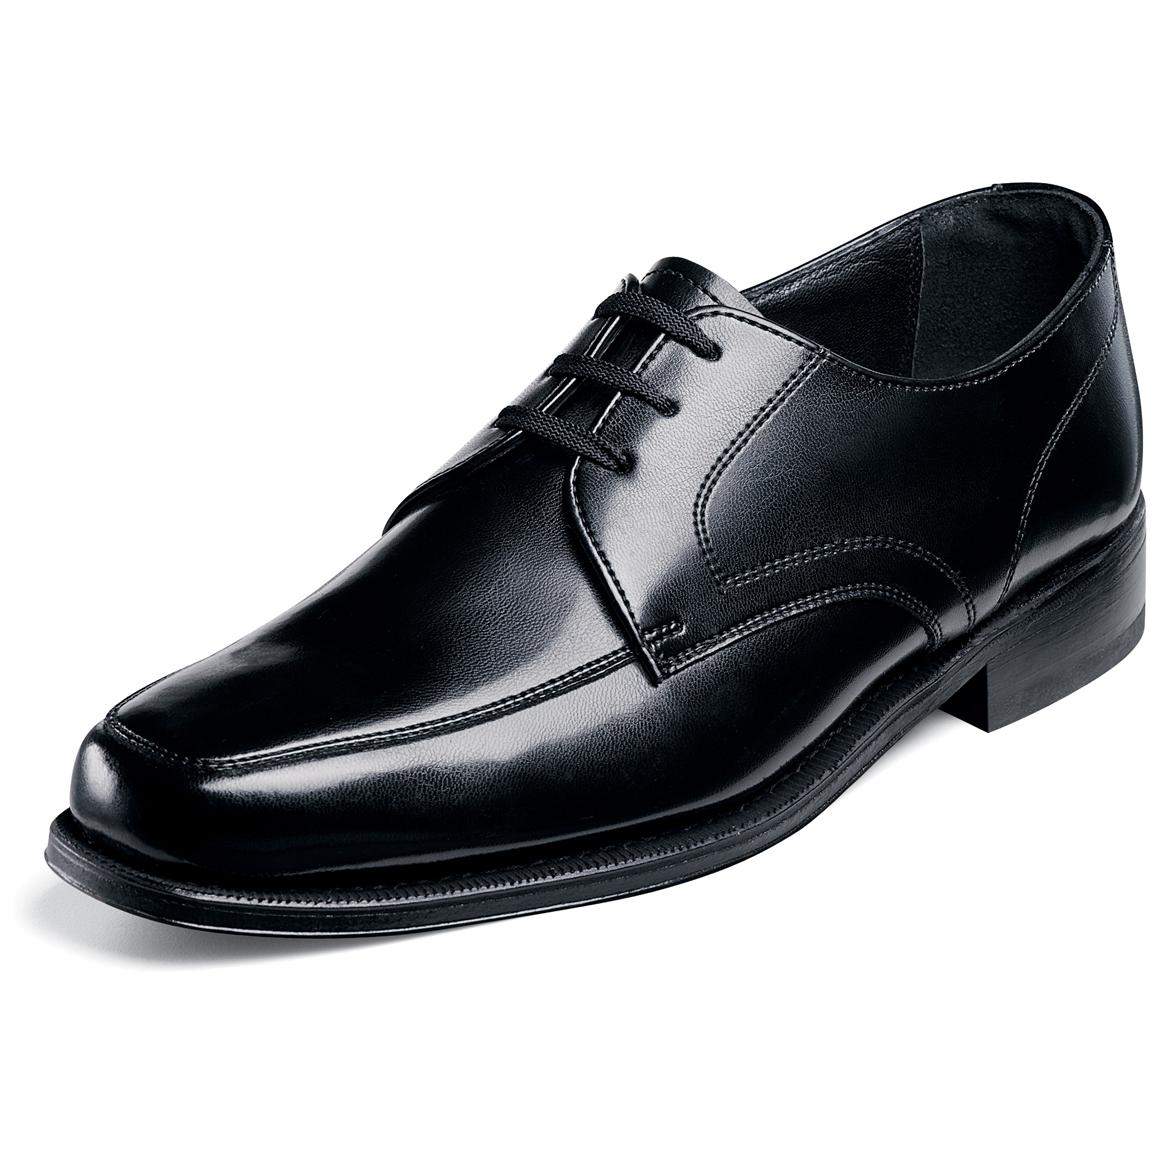 The Appropriate Dress Shoes for Men | StylesWardrobe.com